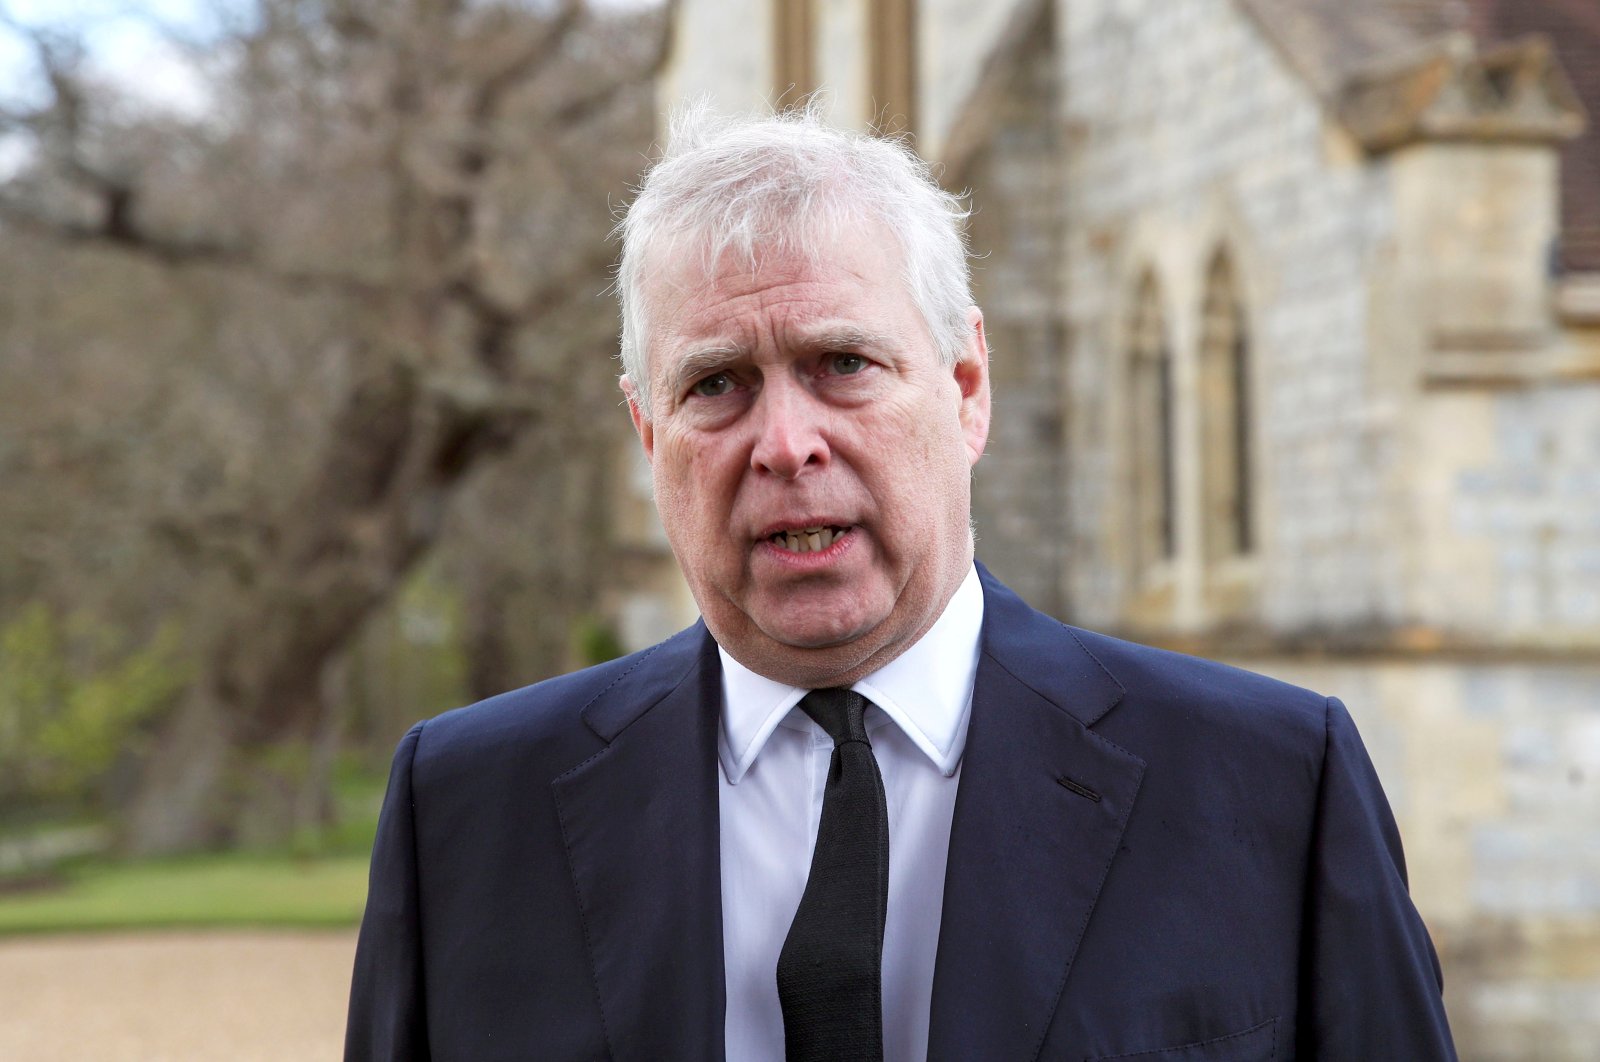 Britain's Prince Andrew speaks to the media during Sunday service, following his father Prince Philip's death, at the Royal Chapel of All Saints, at Windsor Great Park, U.K., April 11, 2021. (Reuters Photo)